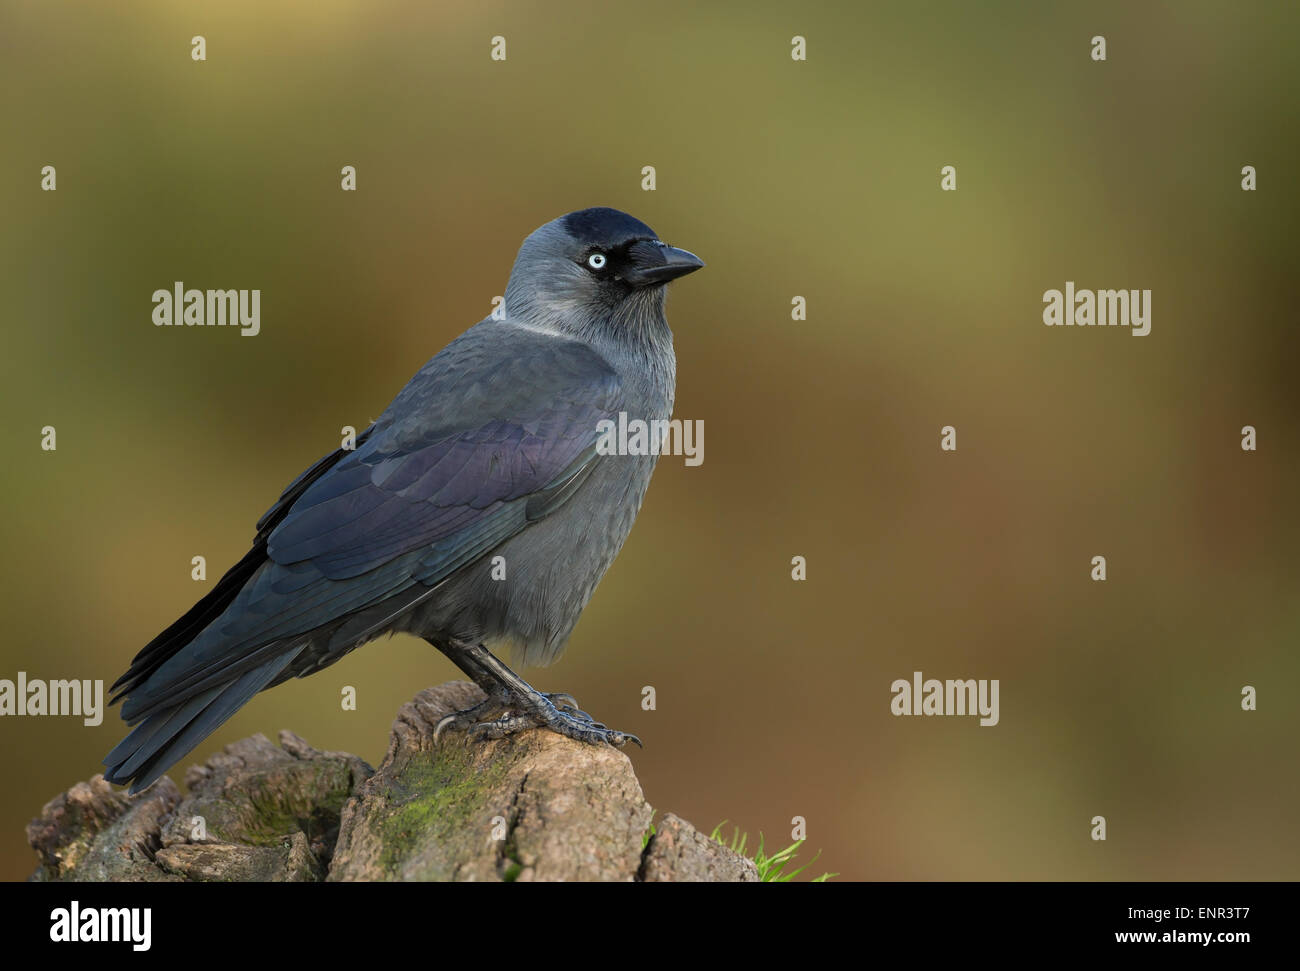 Western jackdaw perching on a wooden post Banque D'Images